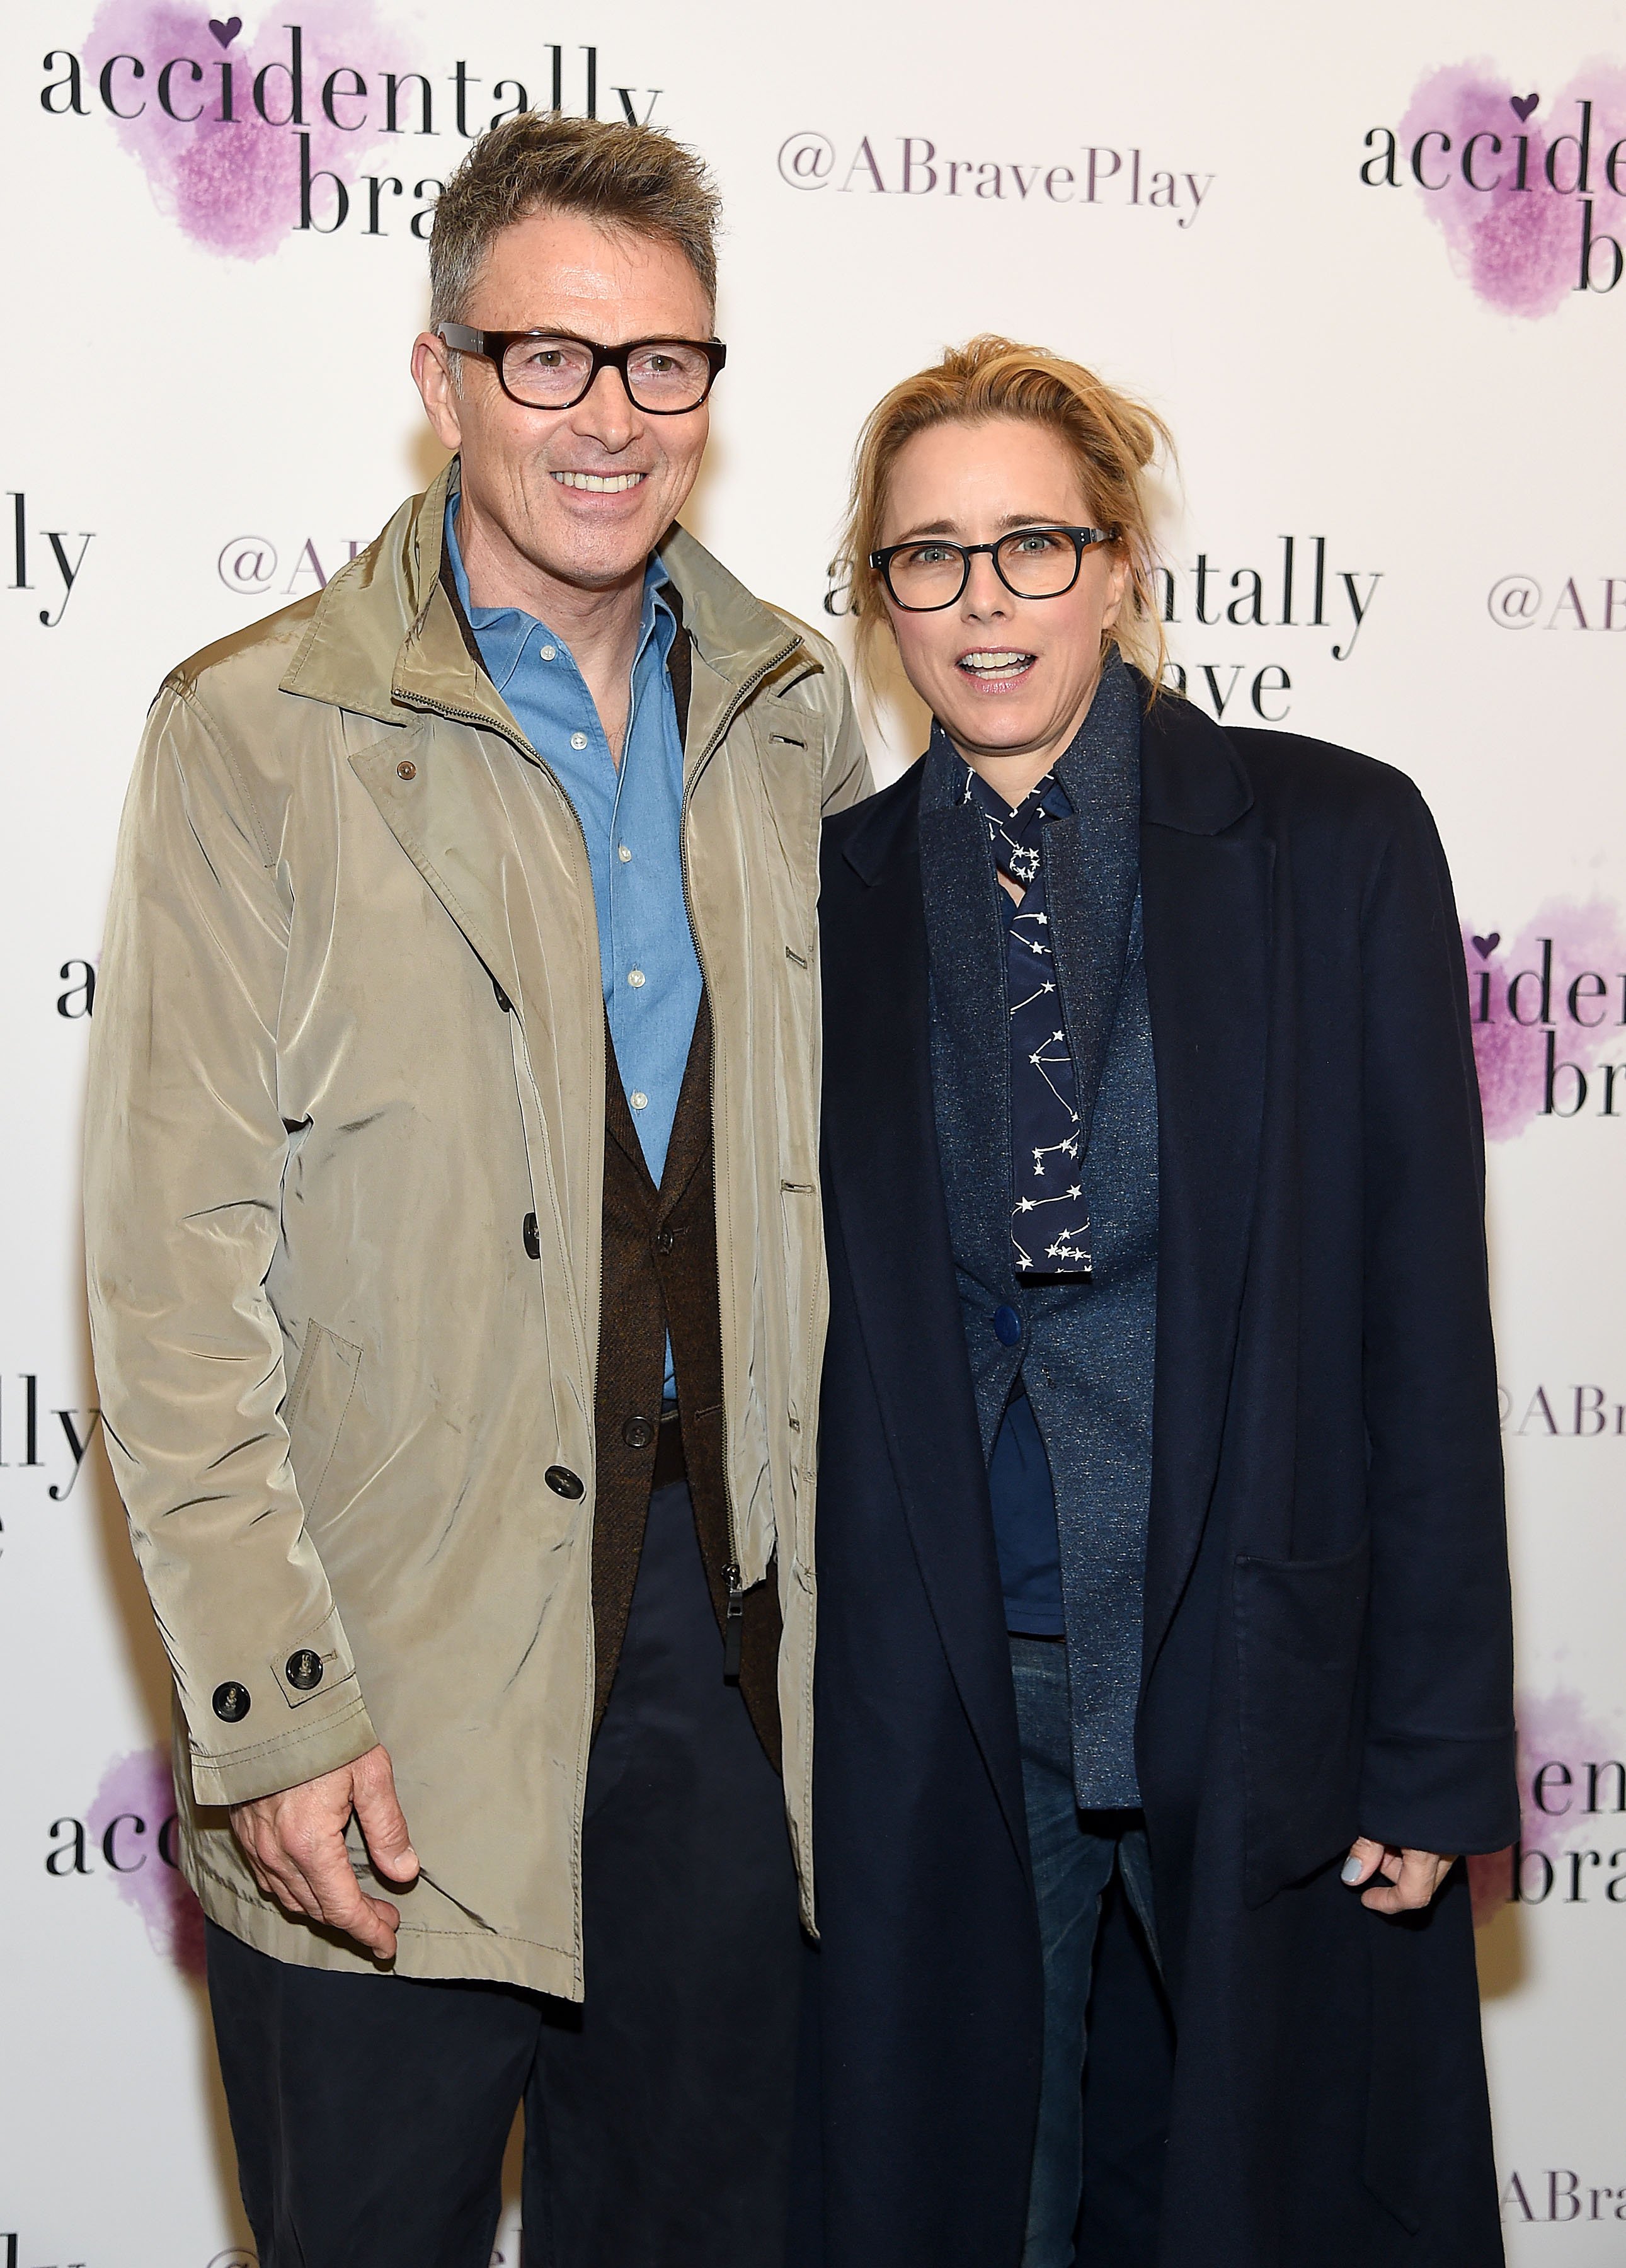 Tim Daly and Téa Leoni attend the "Accidentally Brave" Opening Night at DR2 Theatre on March 25, 2019 in New York City. | Source: Getty Images